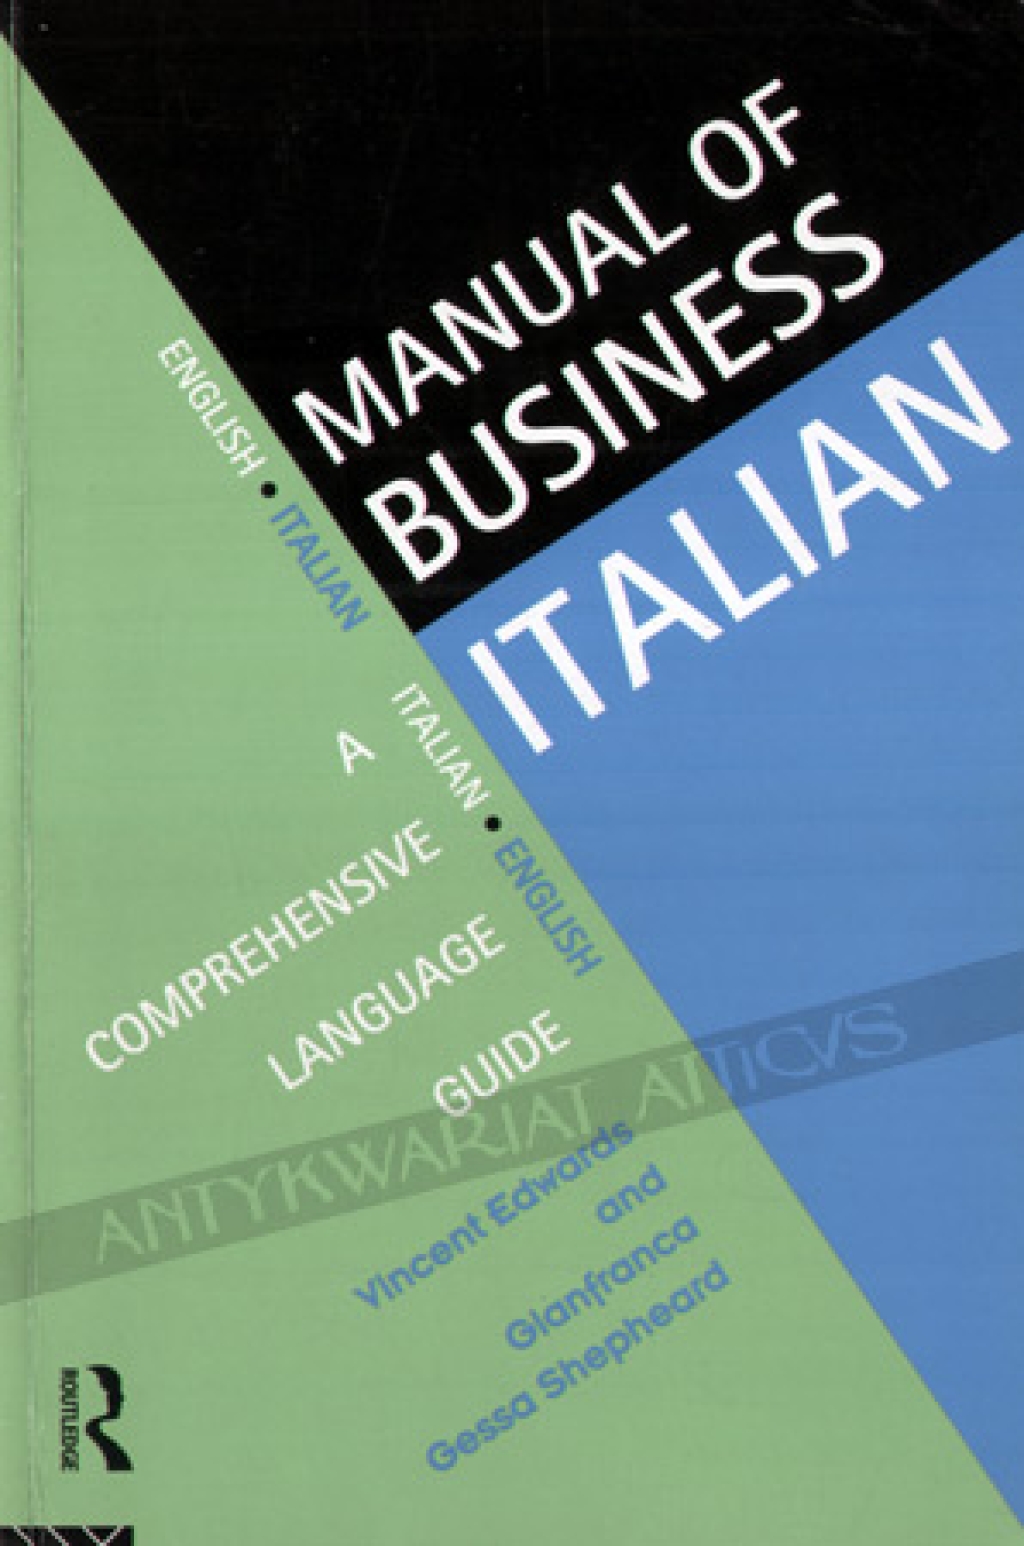 Manual of Business Italian. A comprehensive language guide